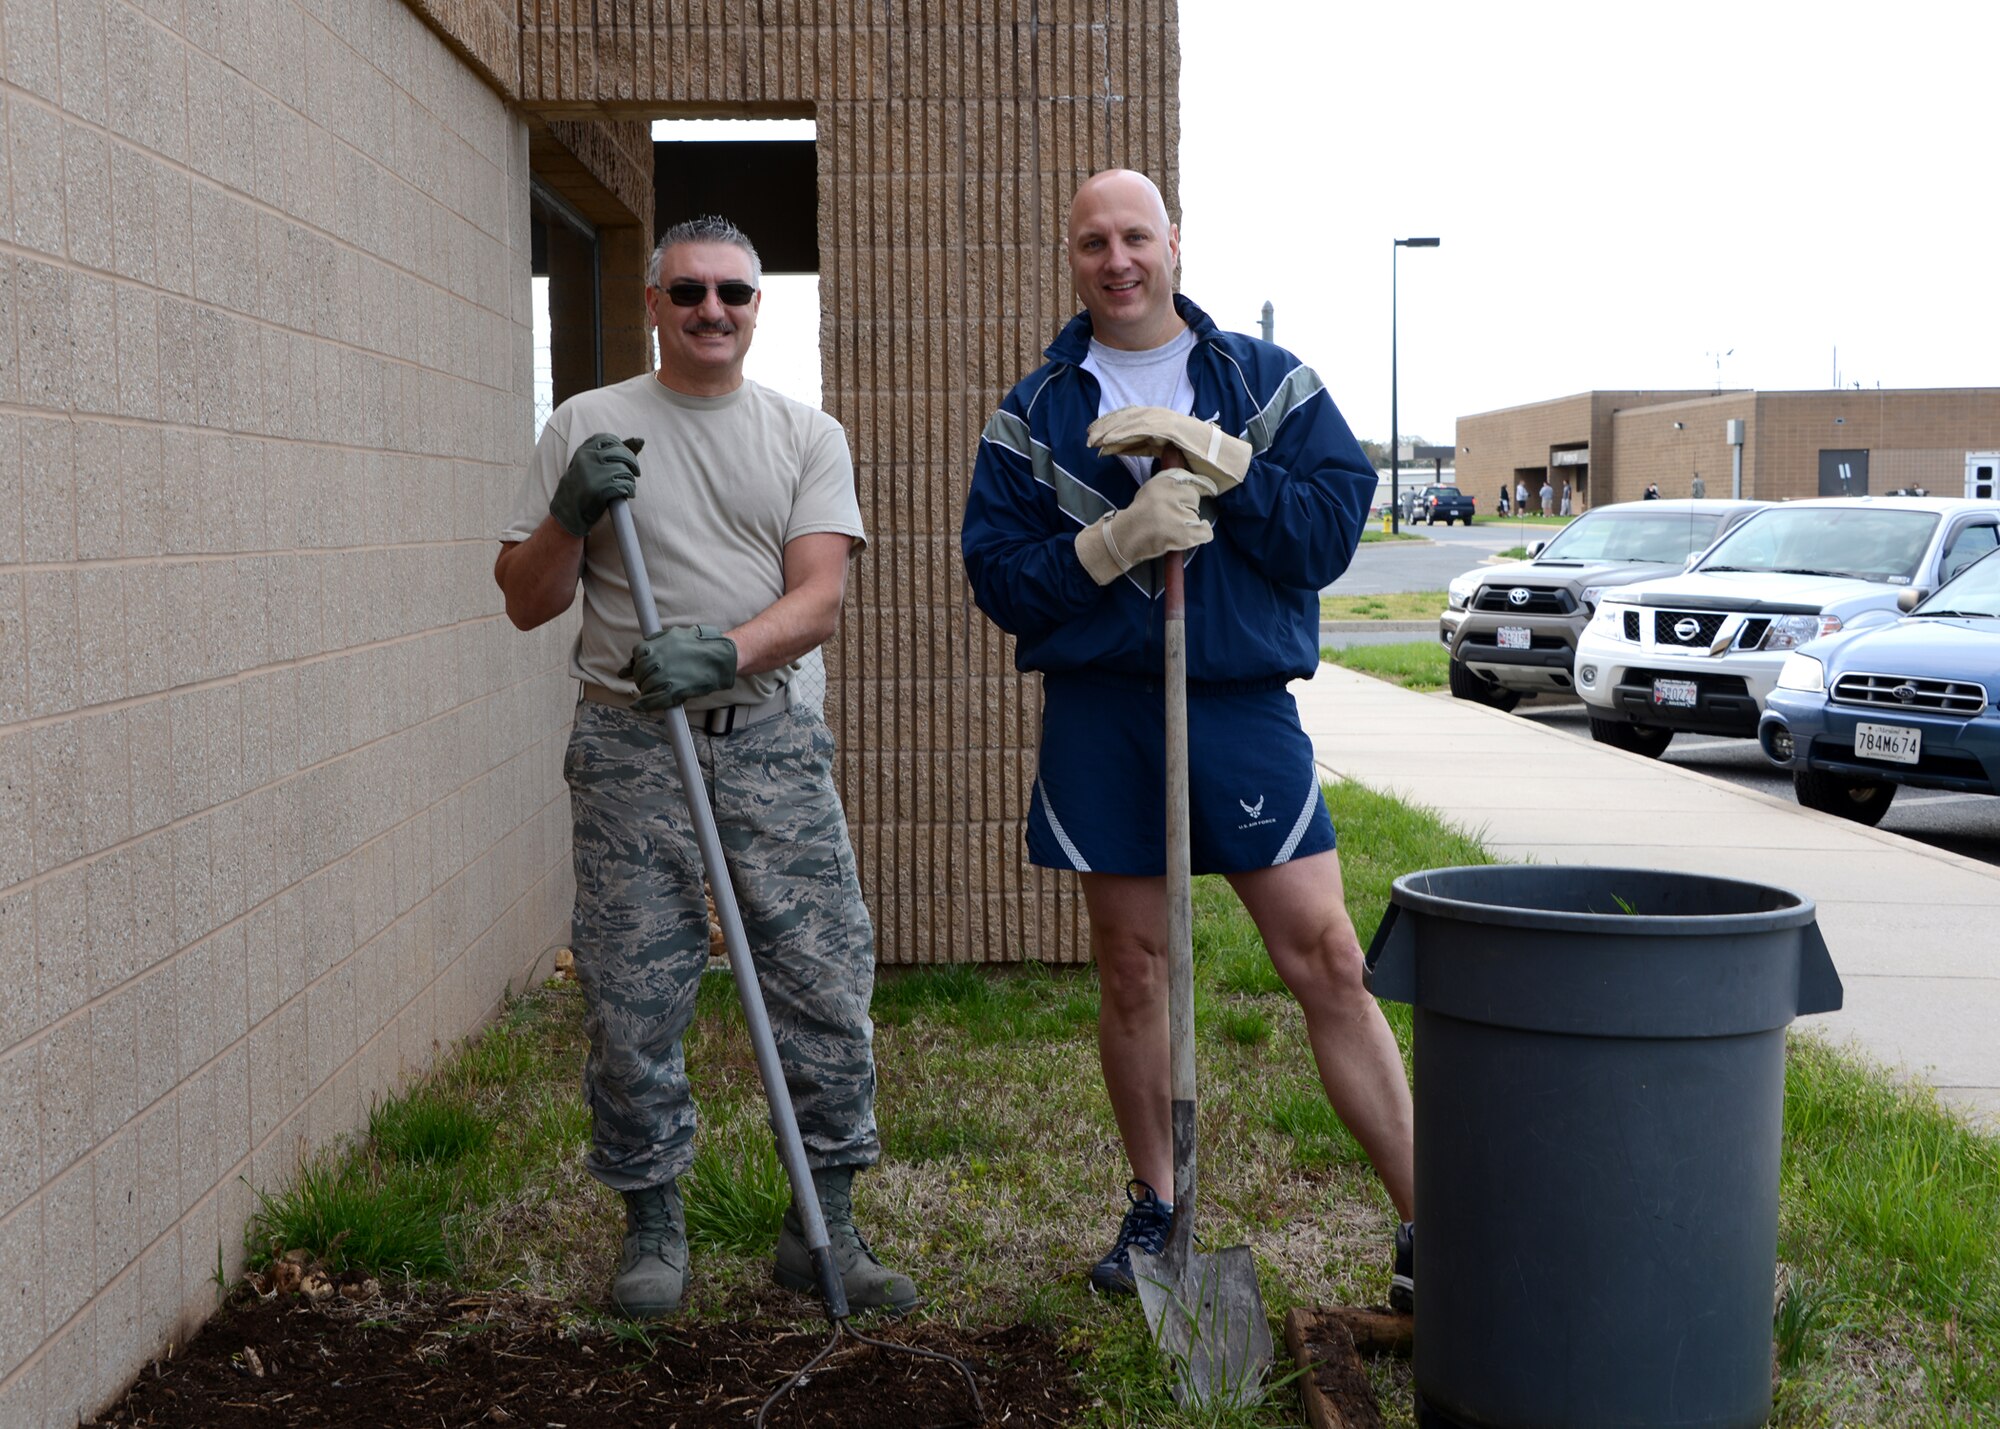 U.S. Air Force Senior Master Sgt. Doug Smith (left), 175th Logistics Readiness Squadron, and Maj. Robert Conover, 175th Logistics Readiness Squadron, take a break from mulching one of the many gardens at Warfield Air National Guard Base, Baltimore, Md., during Base Beautification Day, April 25, 2014. Base Beautification Day gives members of the 175th Wing the opportunity to improve the cleanliness and aesthetics of their outside work areas.  (U.S. Air National Guard photo by Tech. Sgt. Chris Schepers/RELEASED)